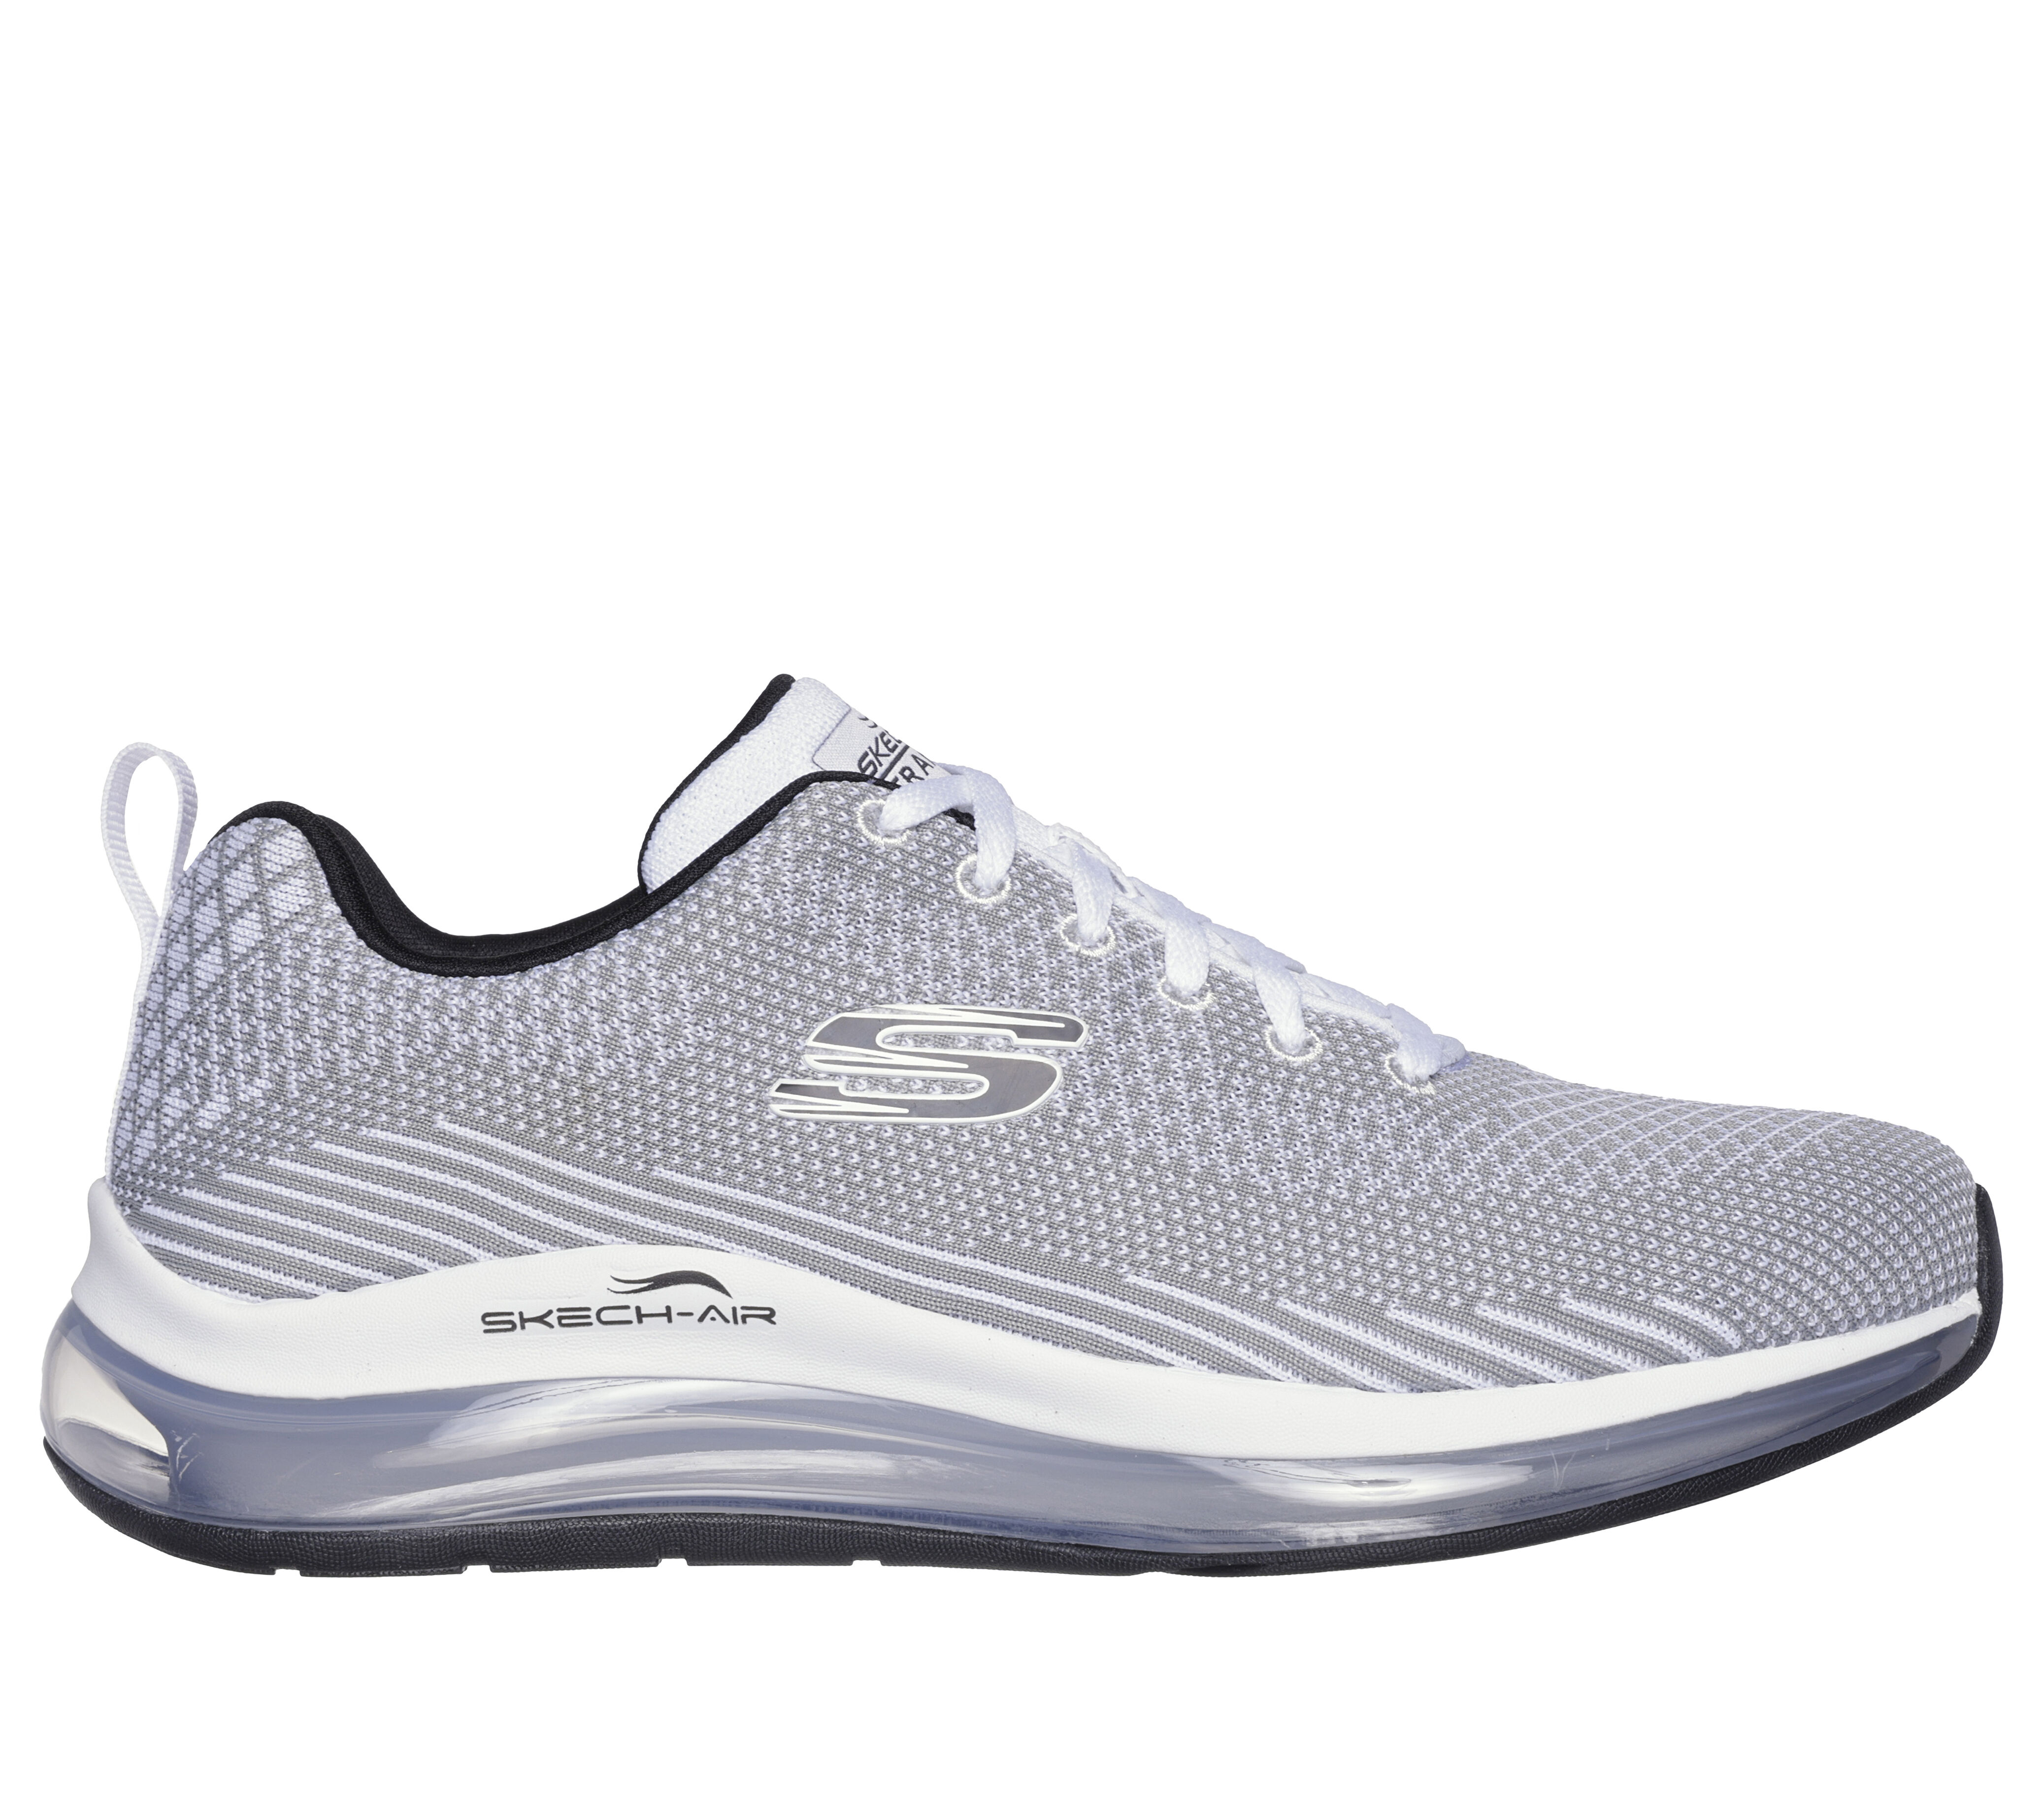 Skechers Trainers & Shoes for Women | Very.co.uk